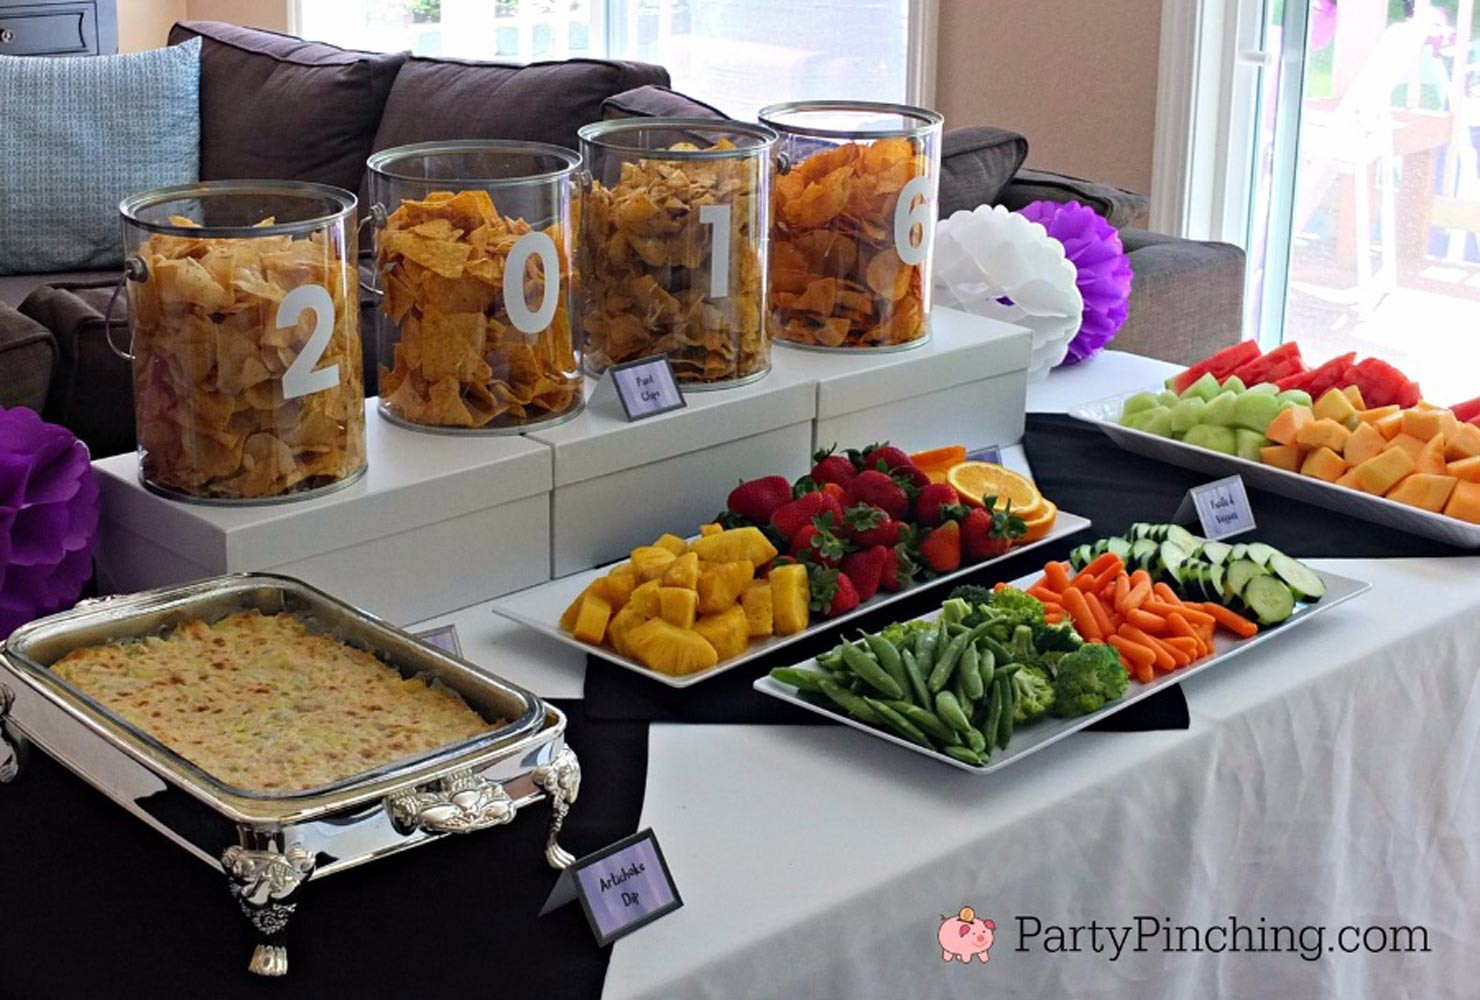 Food Ideas For A Graduation Party
 90 Graduation Party Ideas for High School & College 2019